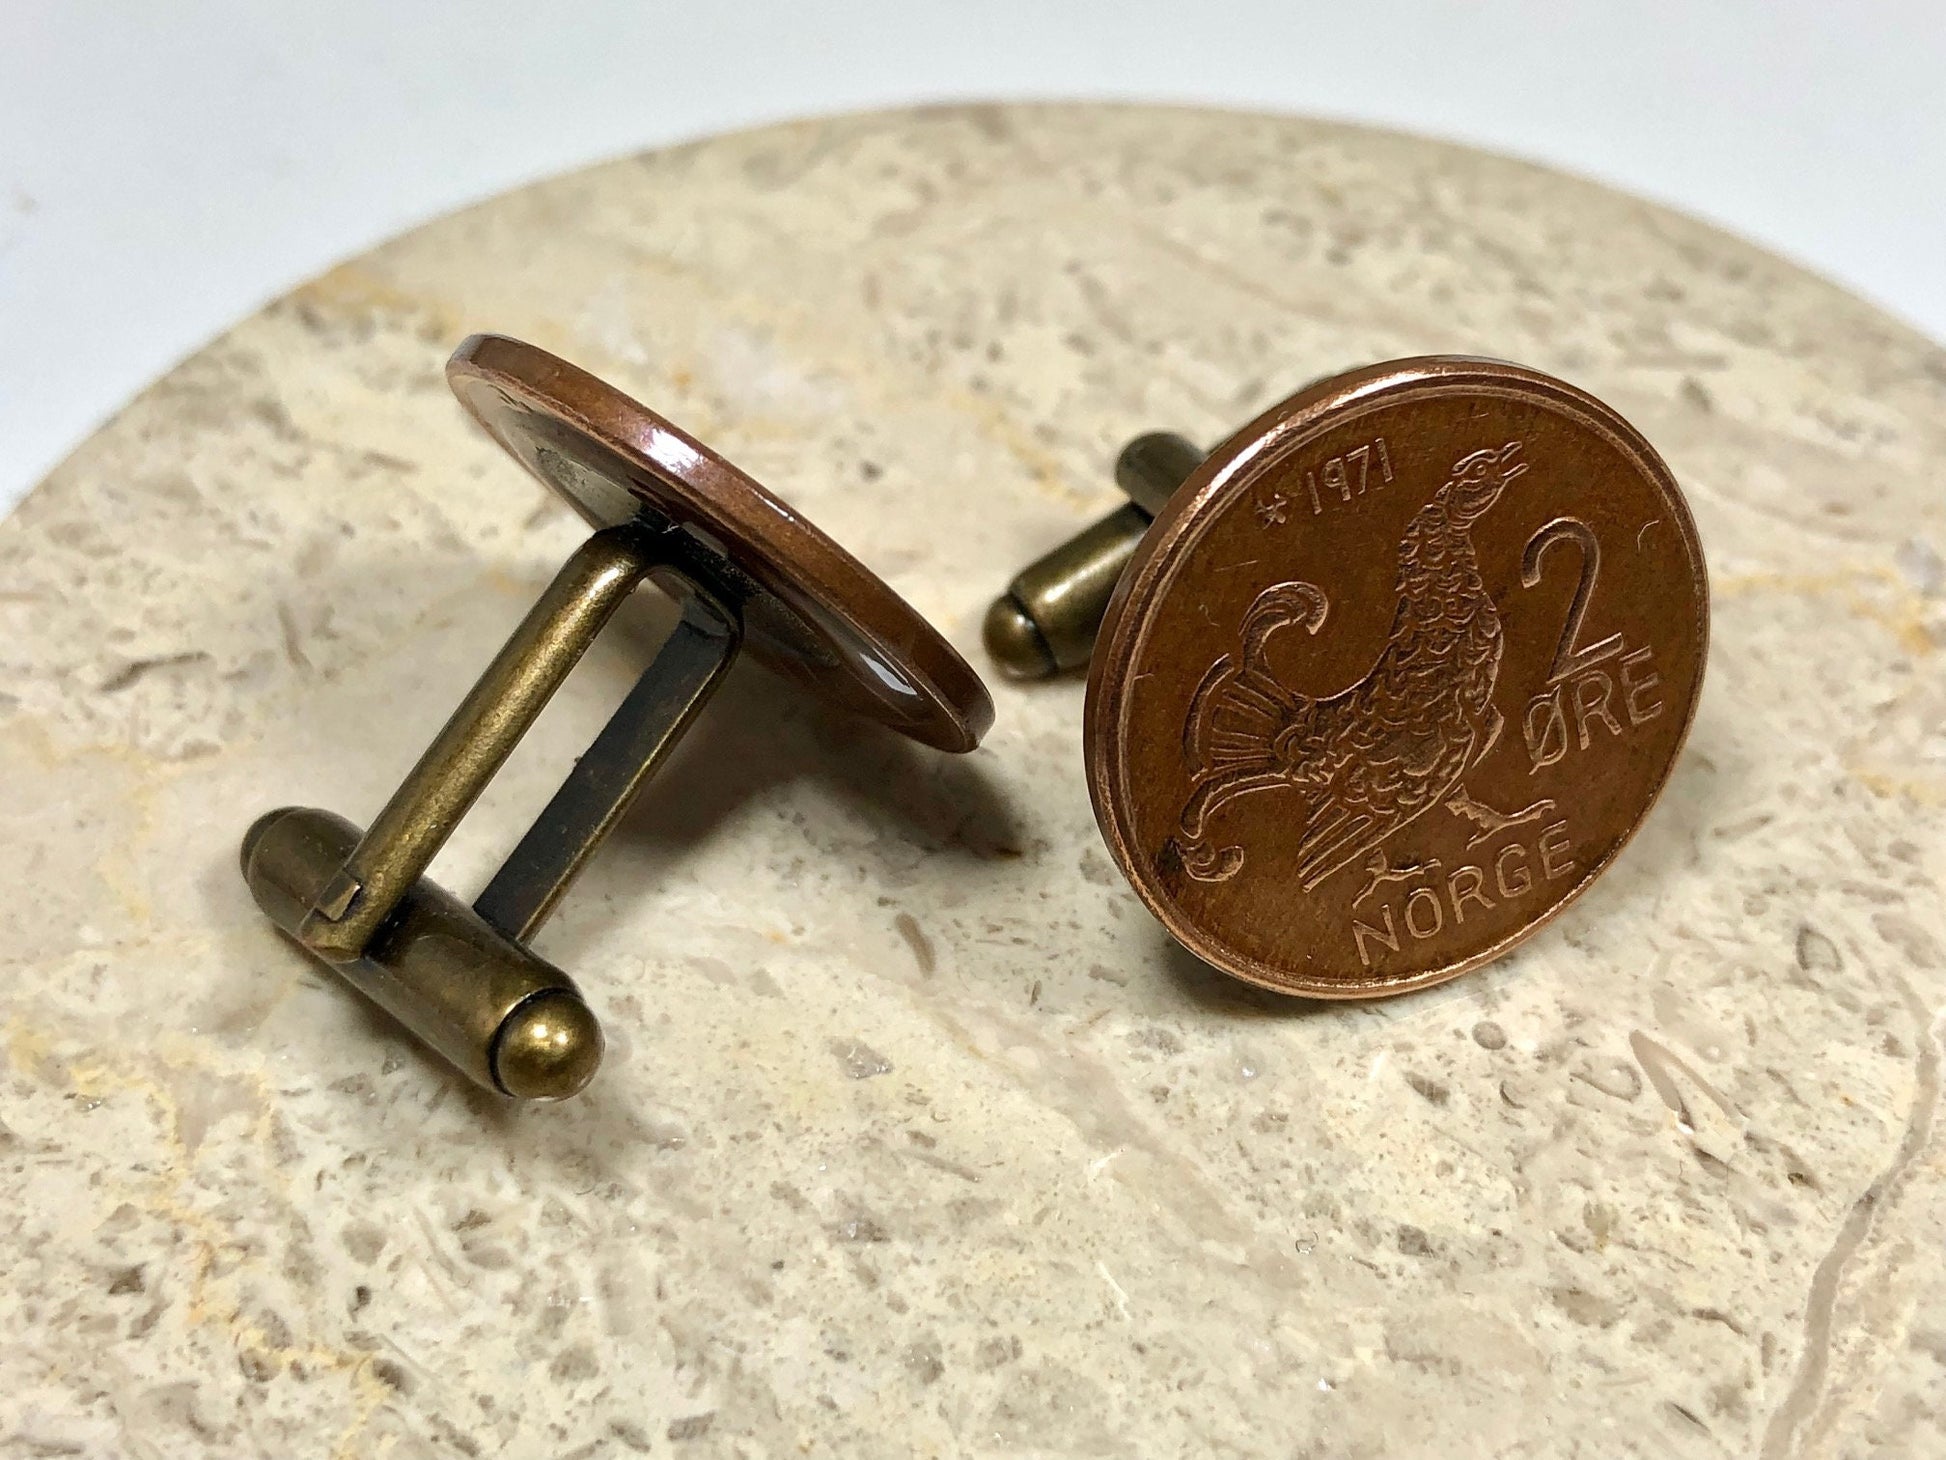 Norway Coin Cuff Links Norwegian 2 Ore Custom Made Vintage and Rare coins - Cufflinks Coin Enthusiast - Suit and Tie Accessory